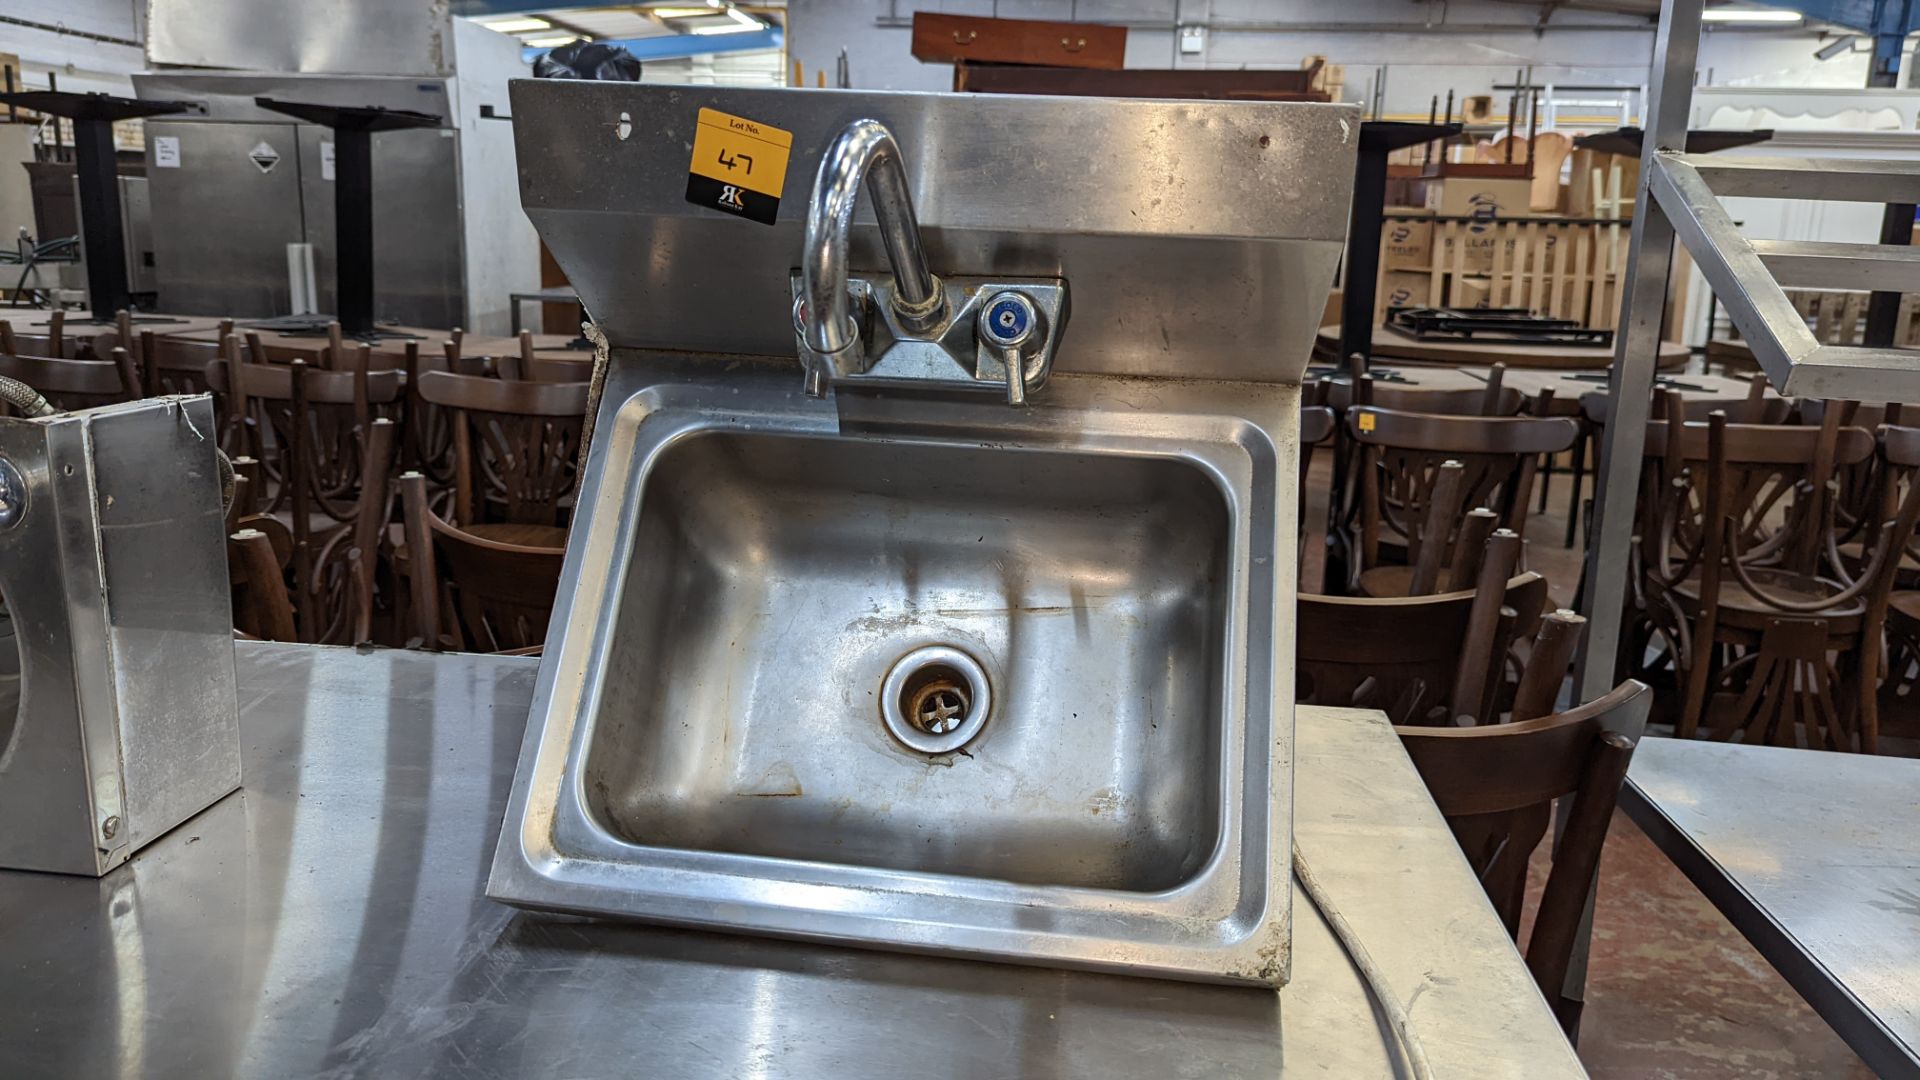 Stainless steel handwashing basin with taps - Image 2 of 3